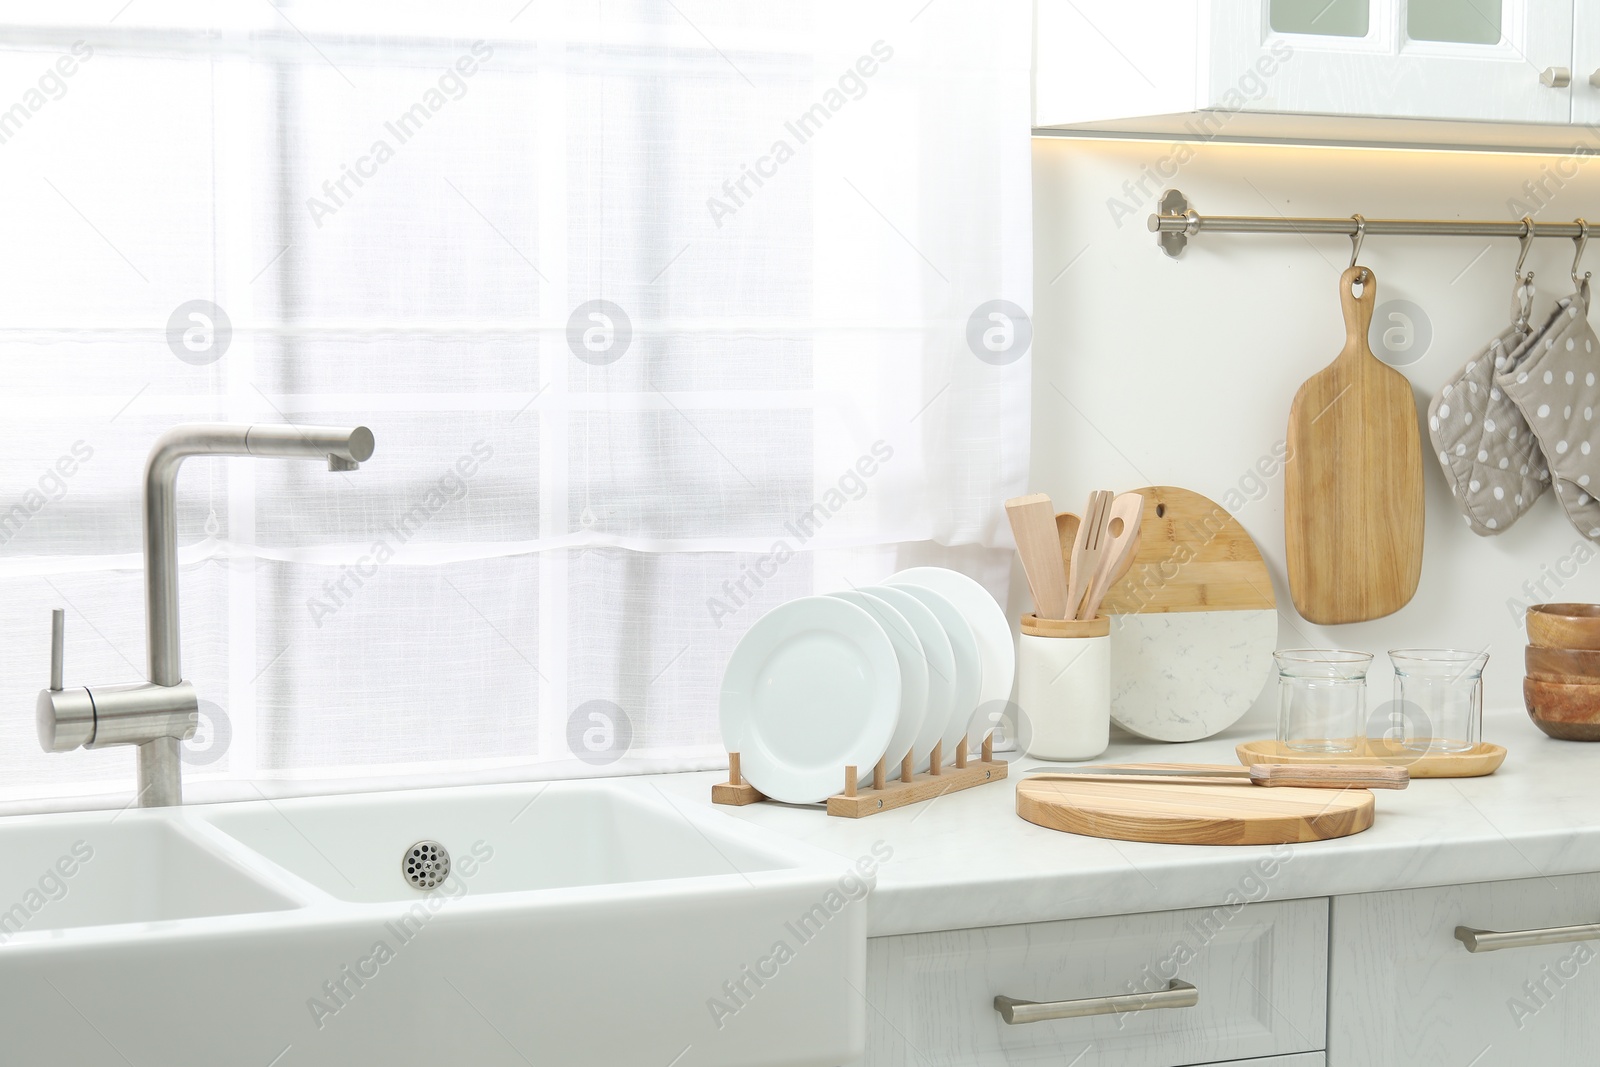 Photo of Wooden cutting boards, other cooking utensils and dishware on white countertop near sink in kitchen